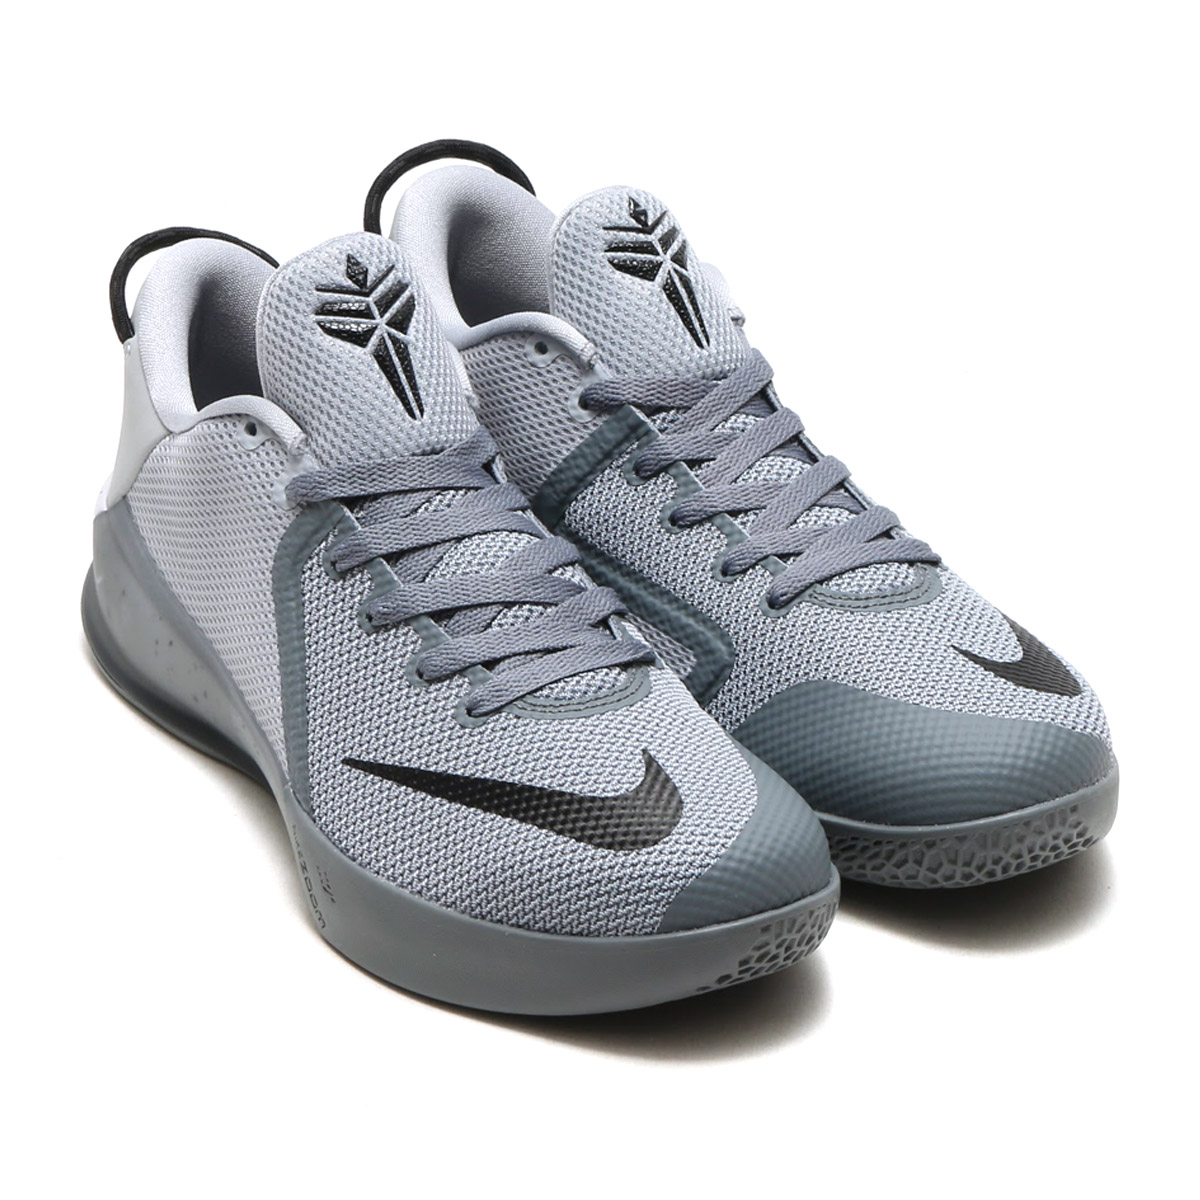 Check Out the Nike Kobe Venomenon 6 in 'Cool Grey' - WearTesters